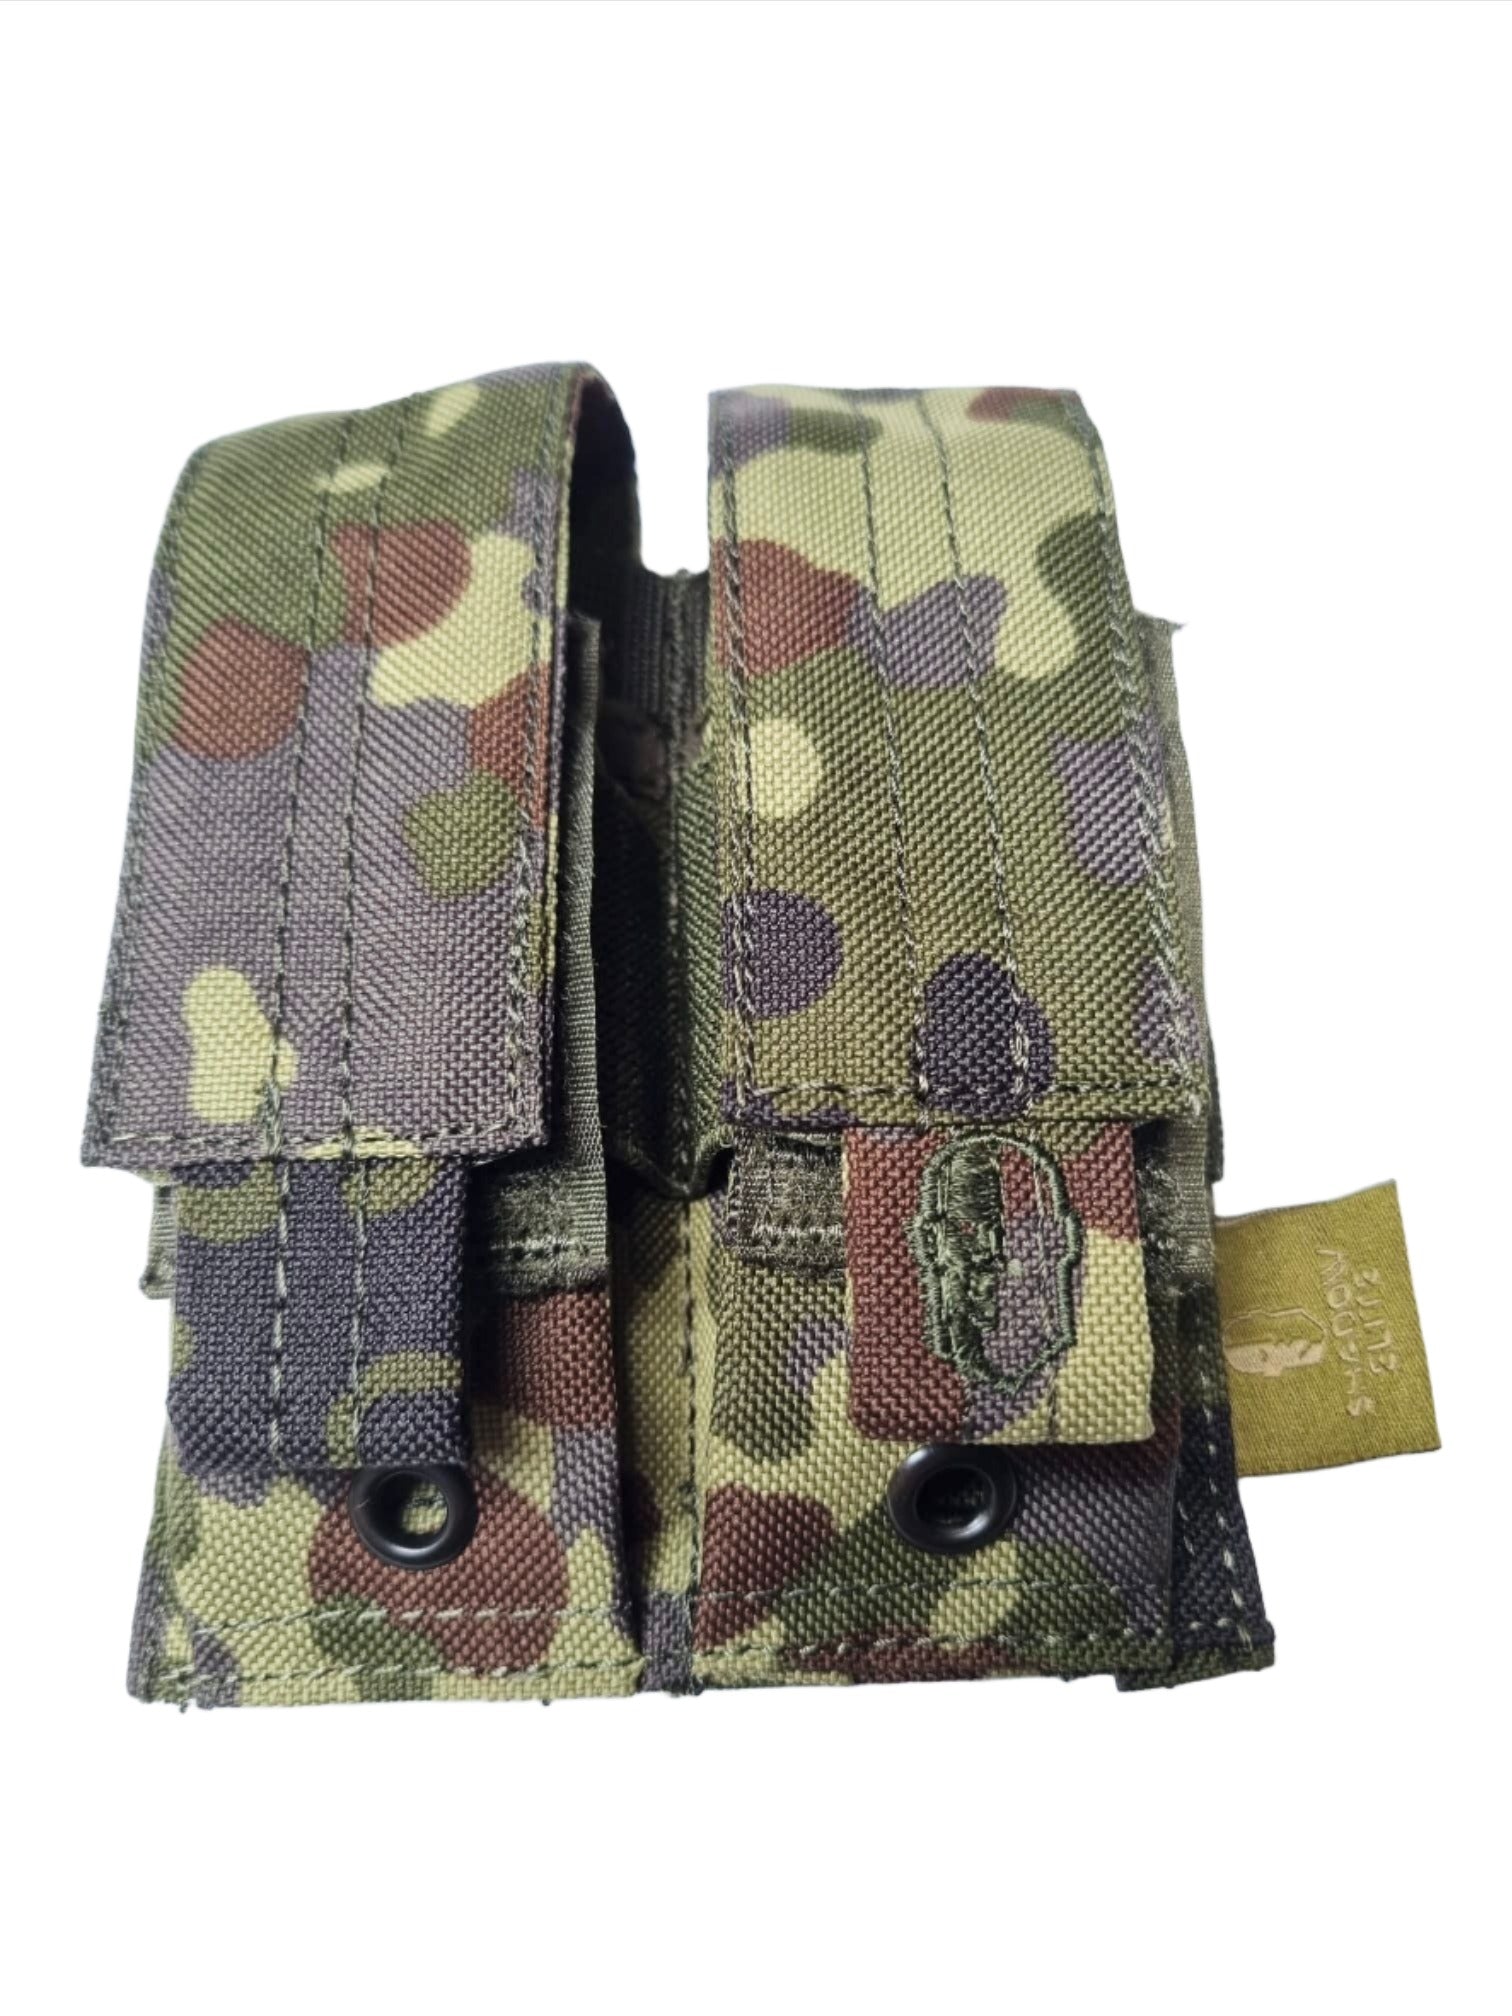 SHE-1065 Double Pistol Mag Pouch FLECTARN